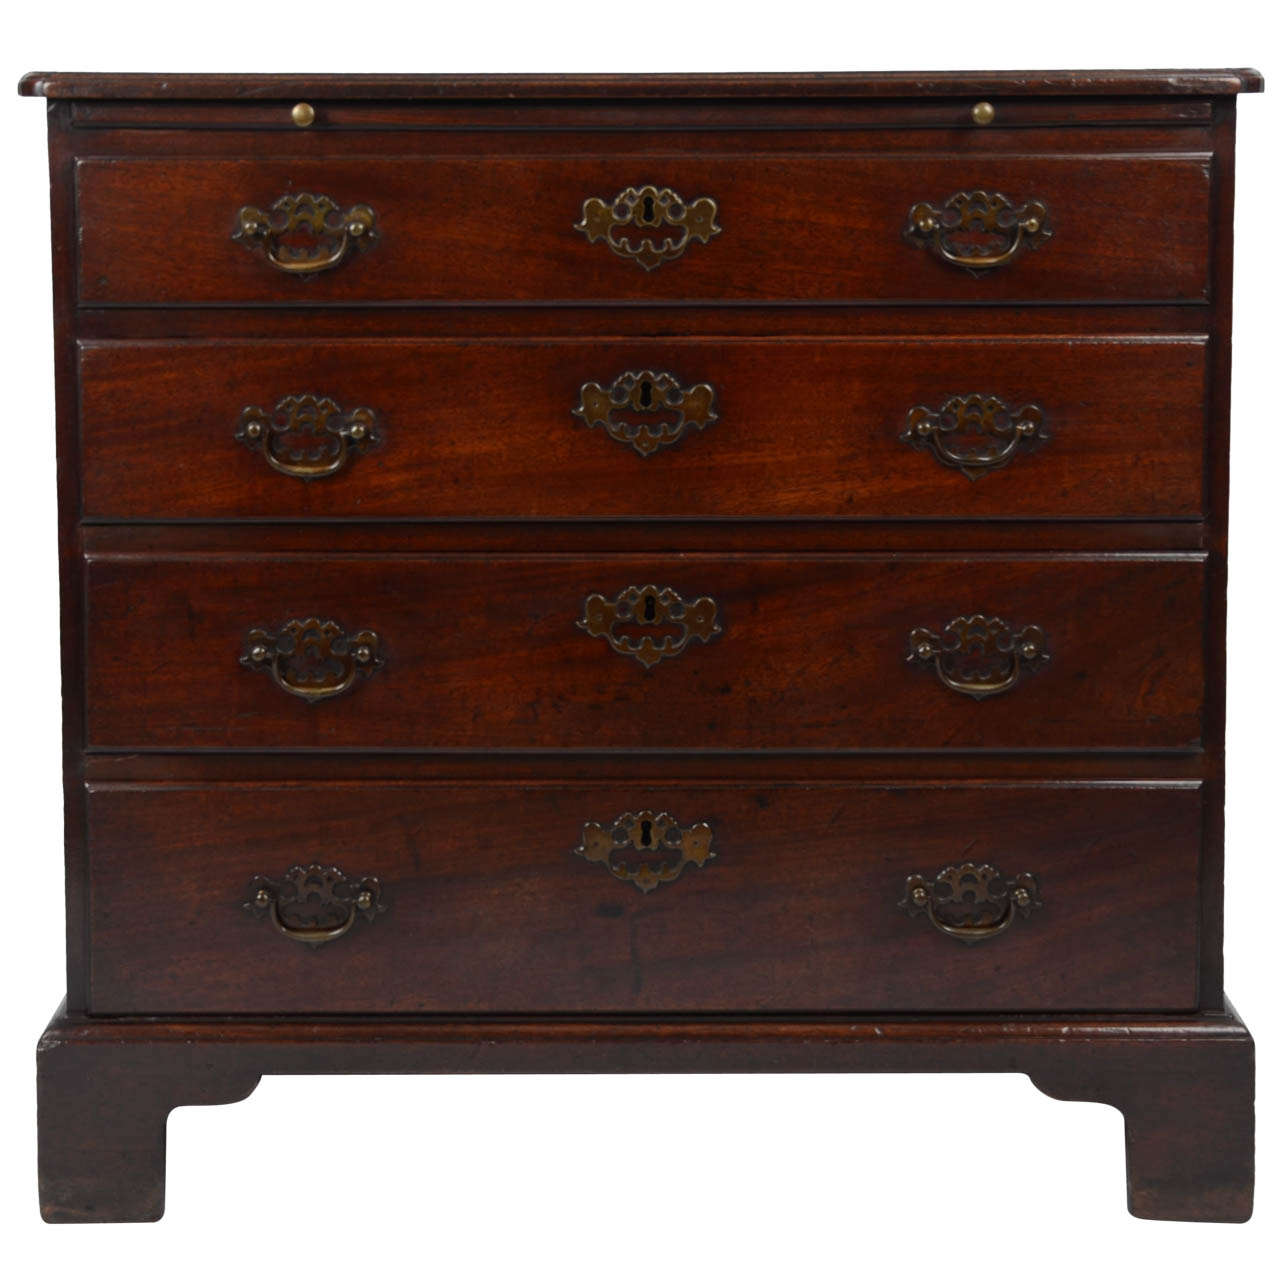 A Rare George Ii Period Mahogany Bachelor's Chest. For Sale